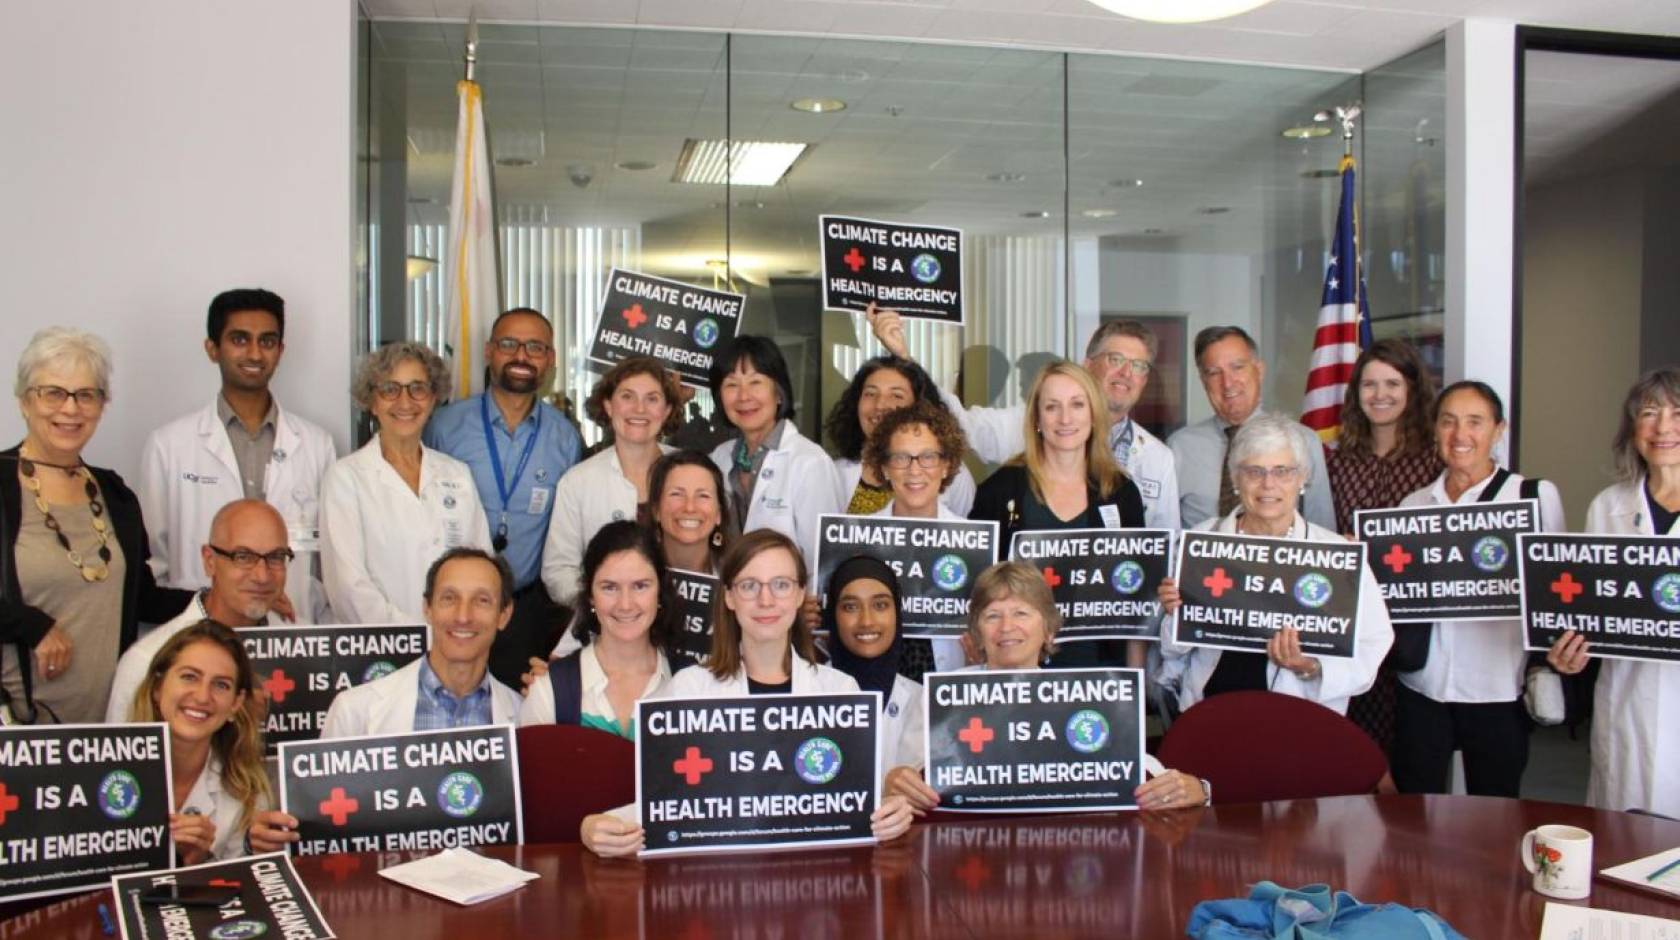 Varied group of people holding up climate change is a health emergency signs